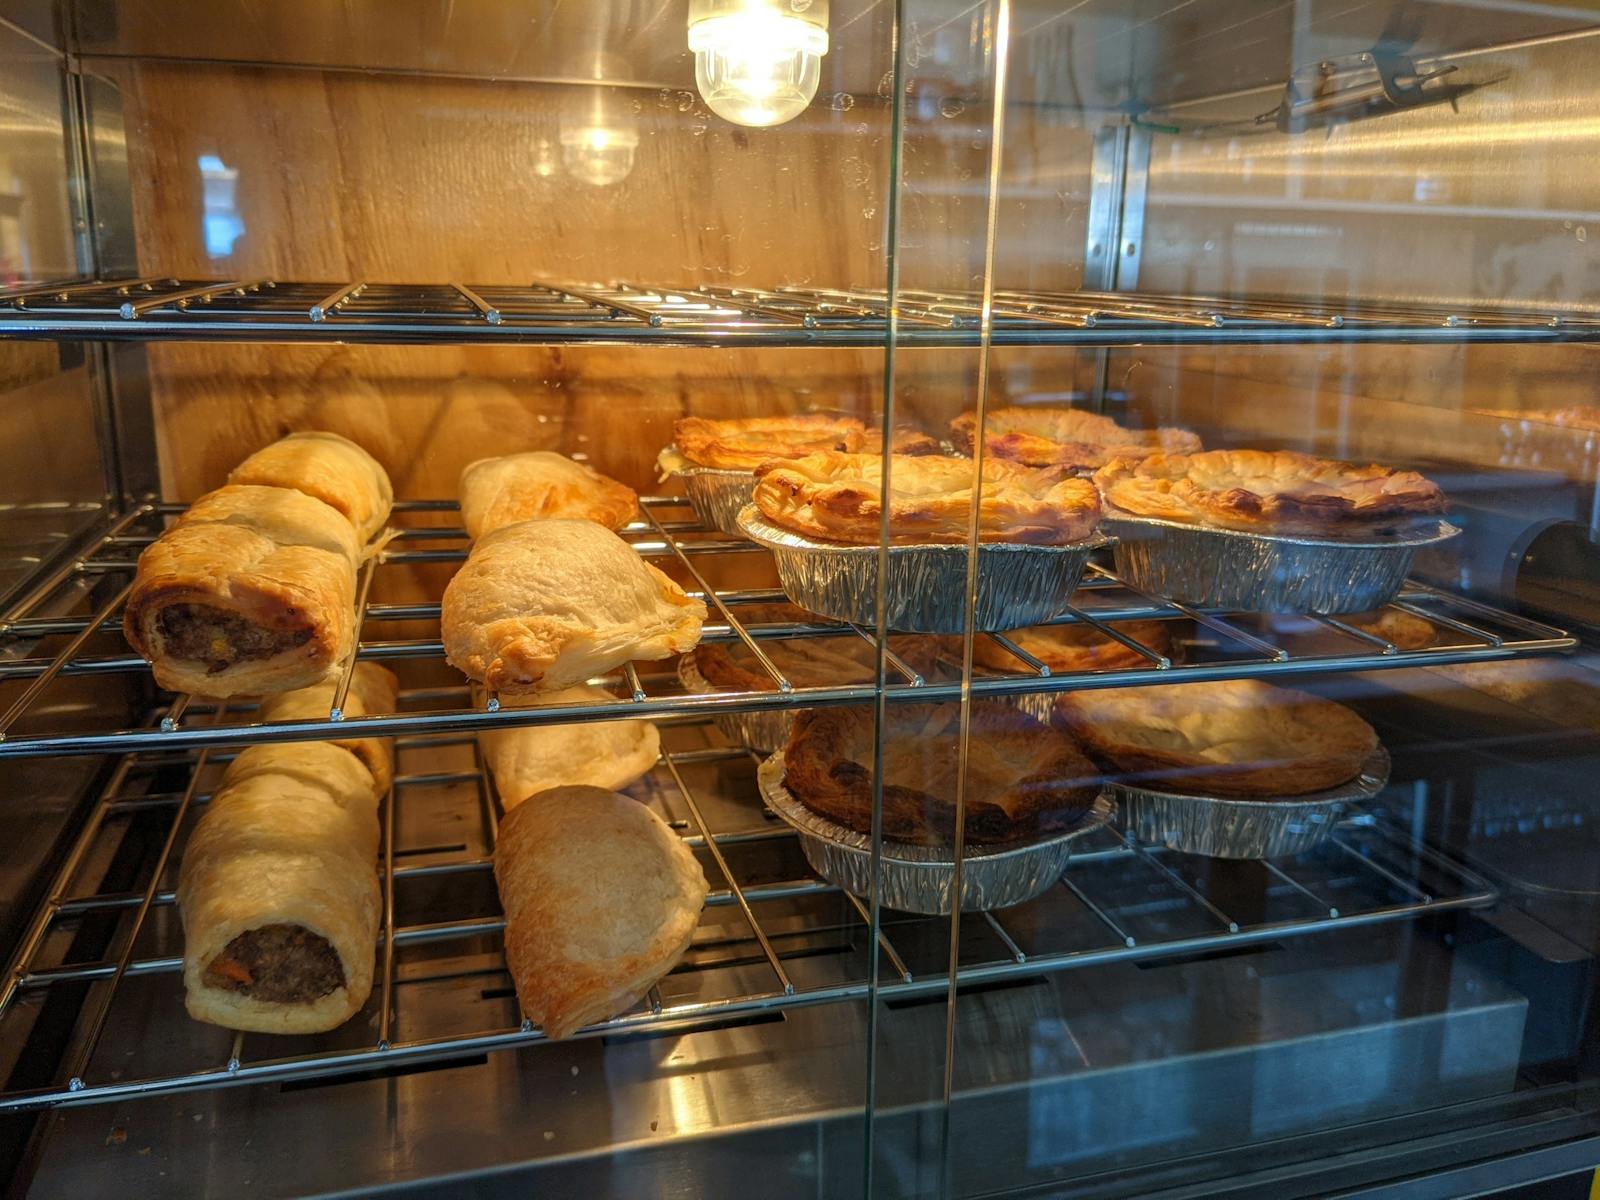 Pies and Pastries in pie warmer at King Island Brewhouse